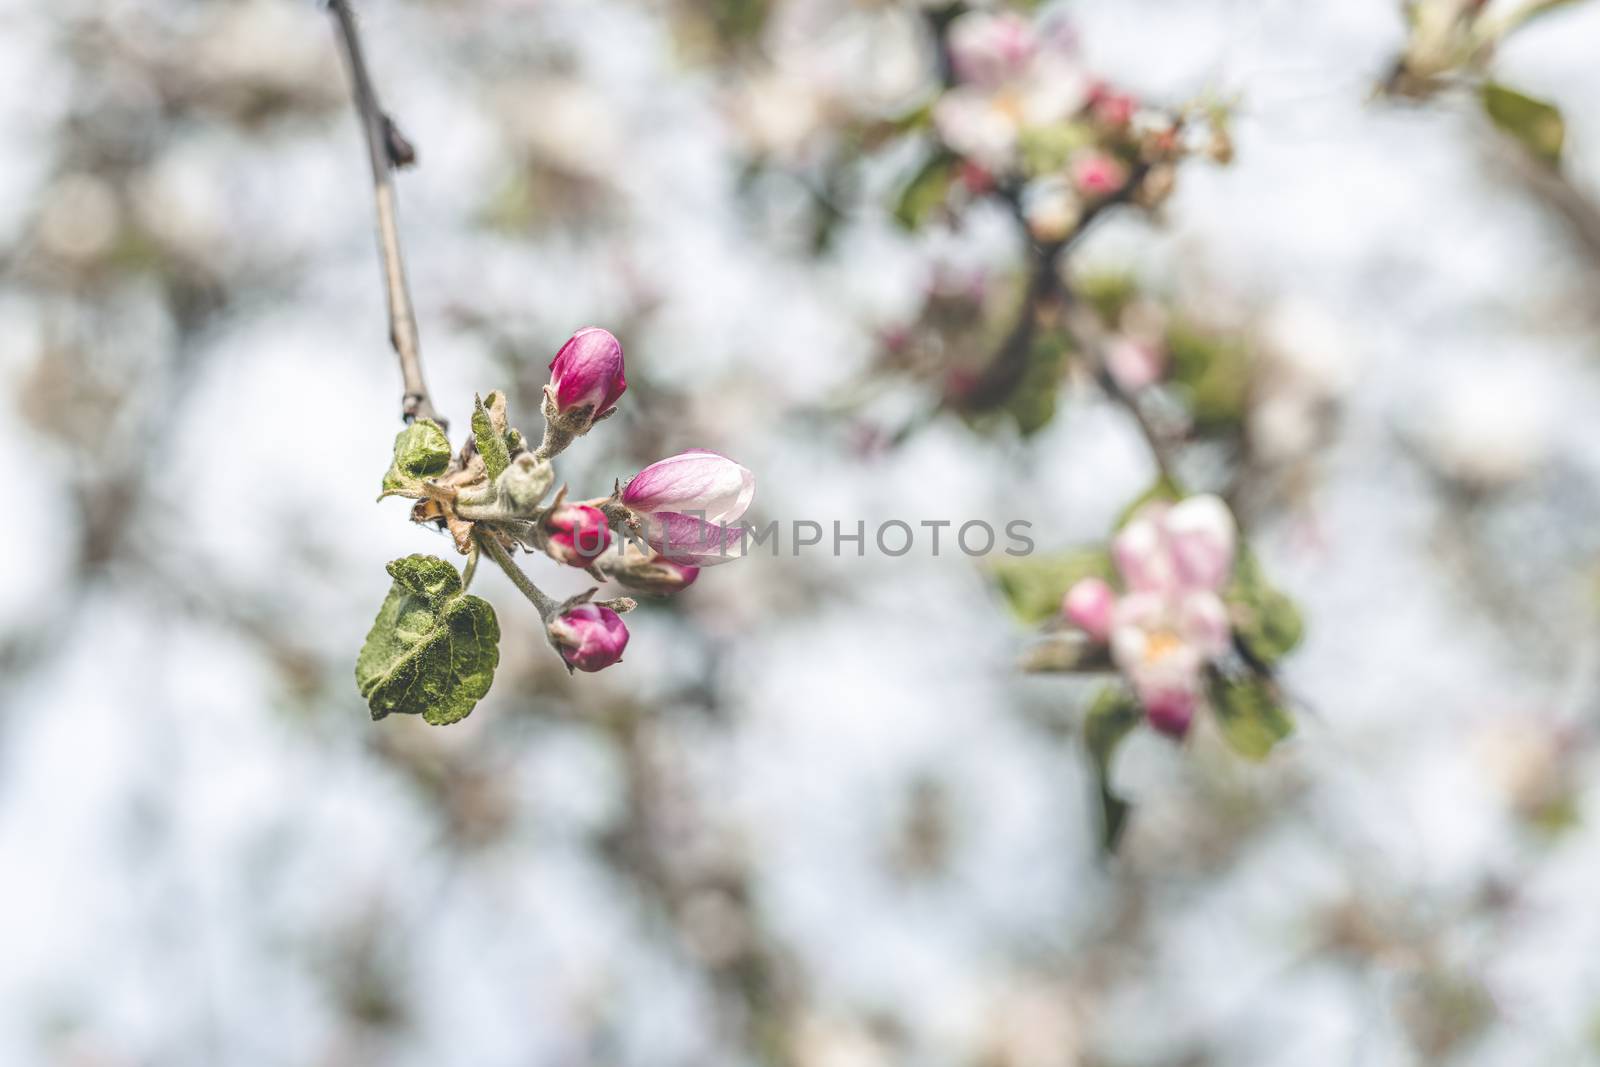 Spring background art with Pink Apple Tree Blossom. Beautiful Nature Scene with Blooming Tree and Sun Flare. Abstract Green blurred background. Shallow depth of field.